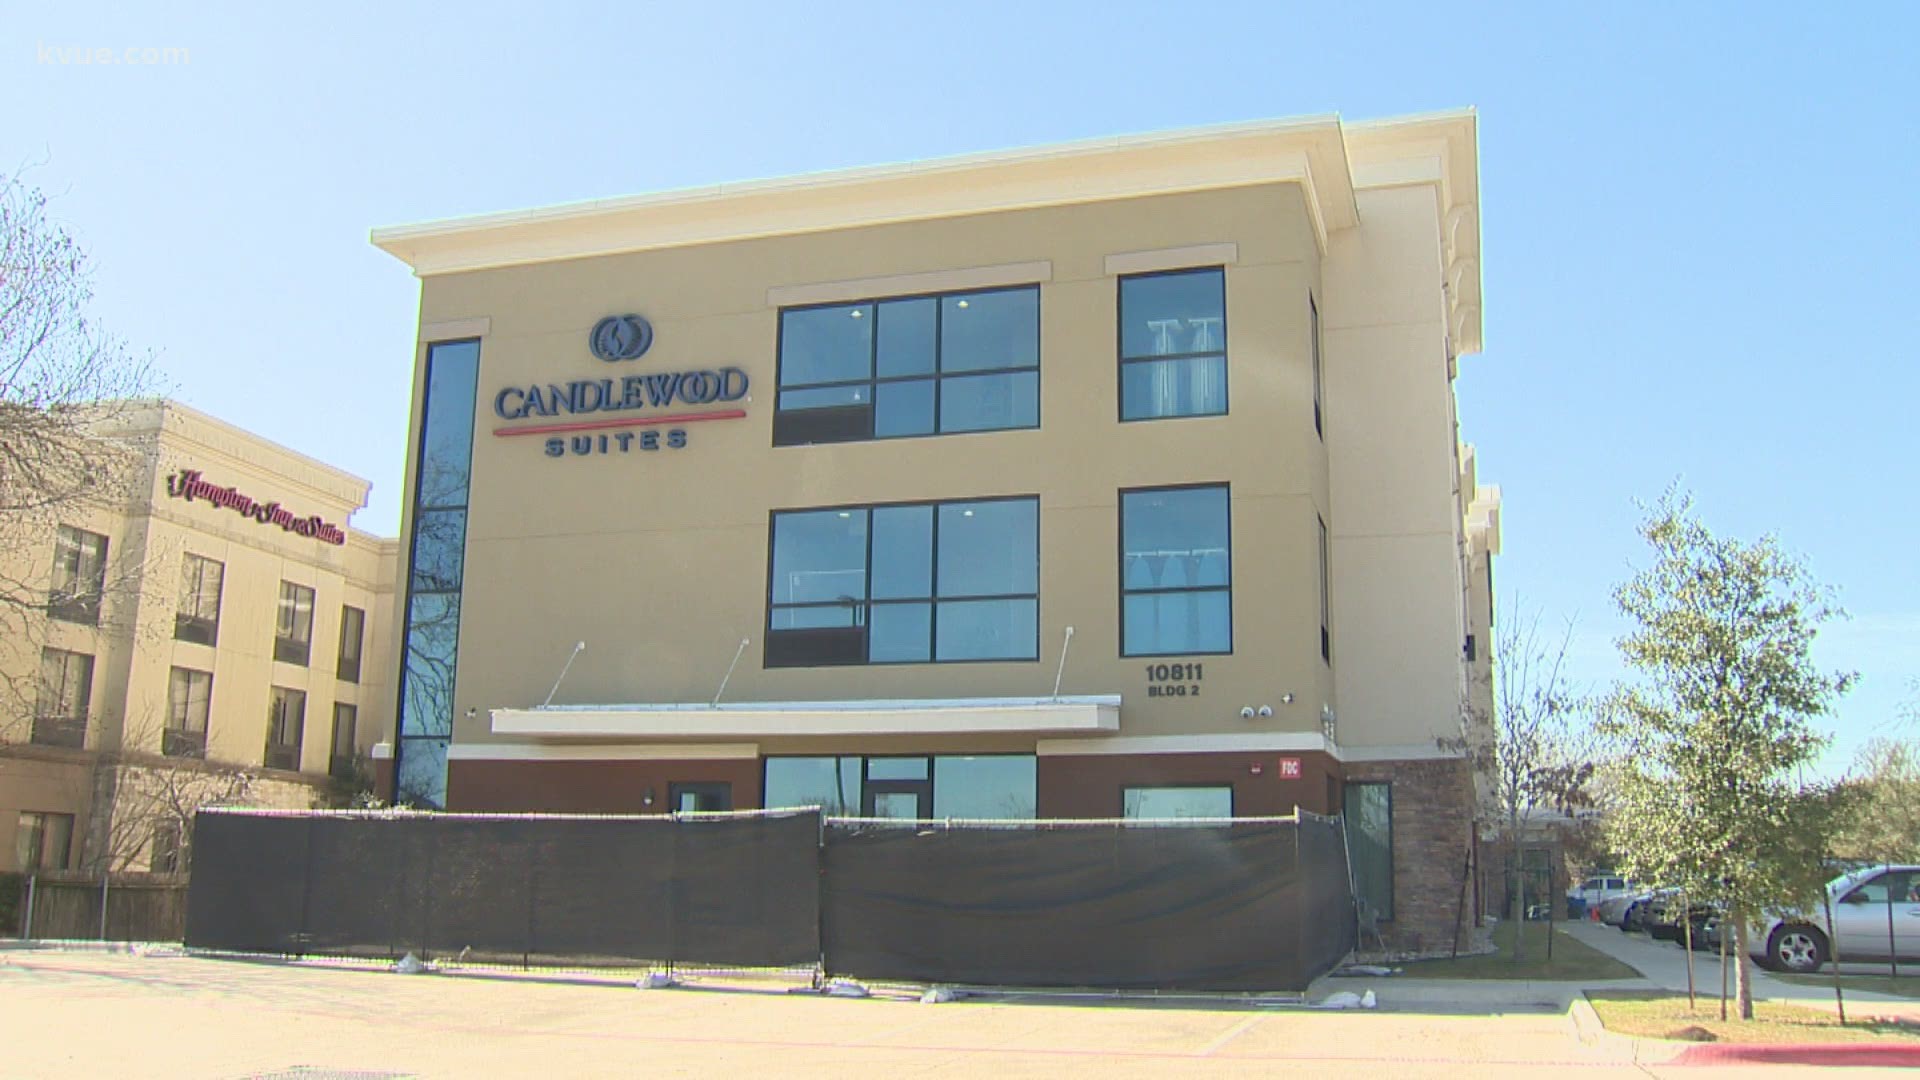 The Candlewood Suites joins a list of hotels Austin has purchased to help house the homeless.